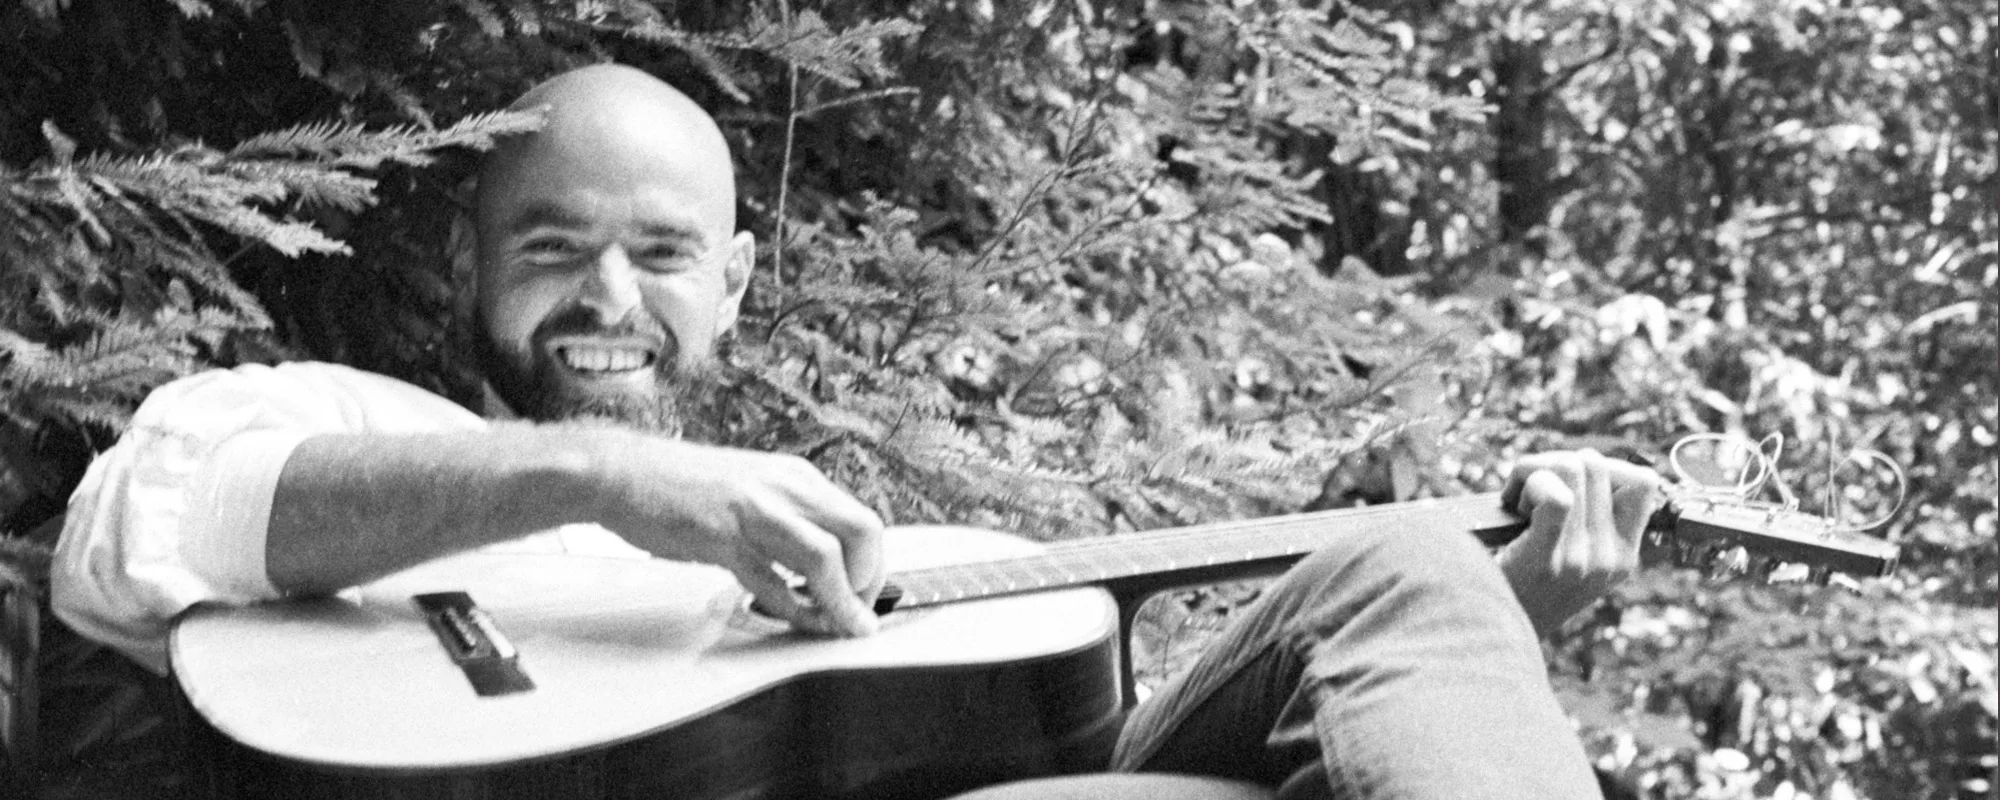 10 Songs You Didn’t Know Shel Silverstein Wrote for Other Artists, Including Loretta Lynn, Waylon Jennings, and More